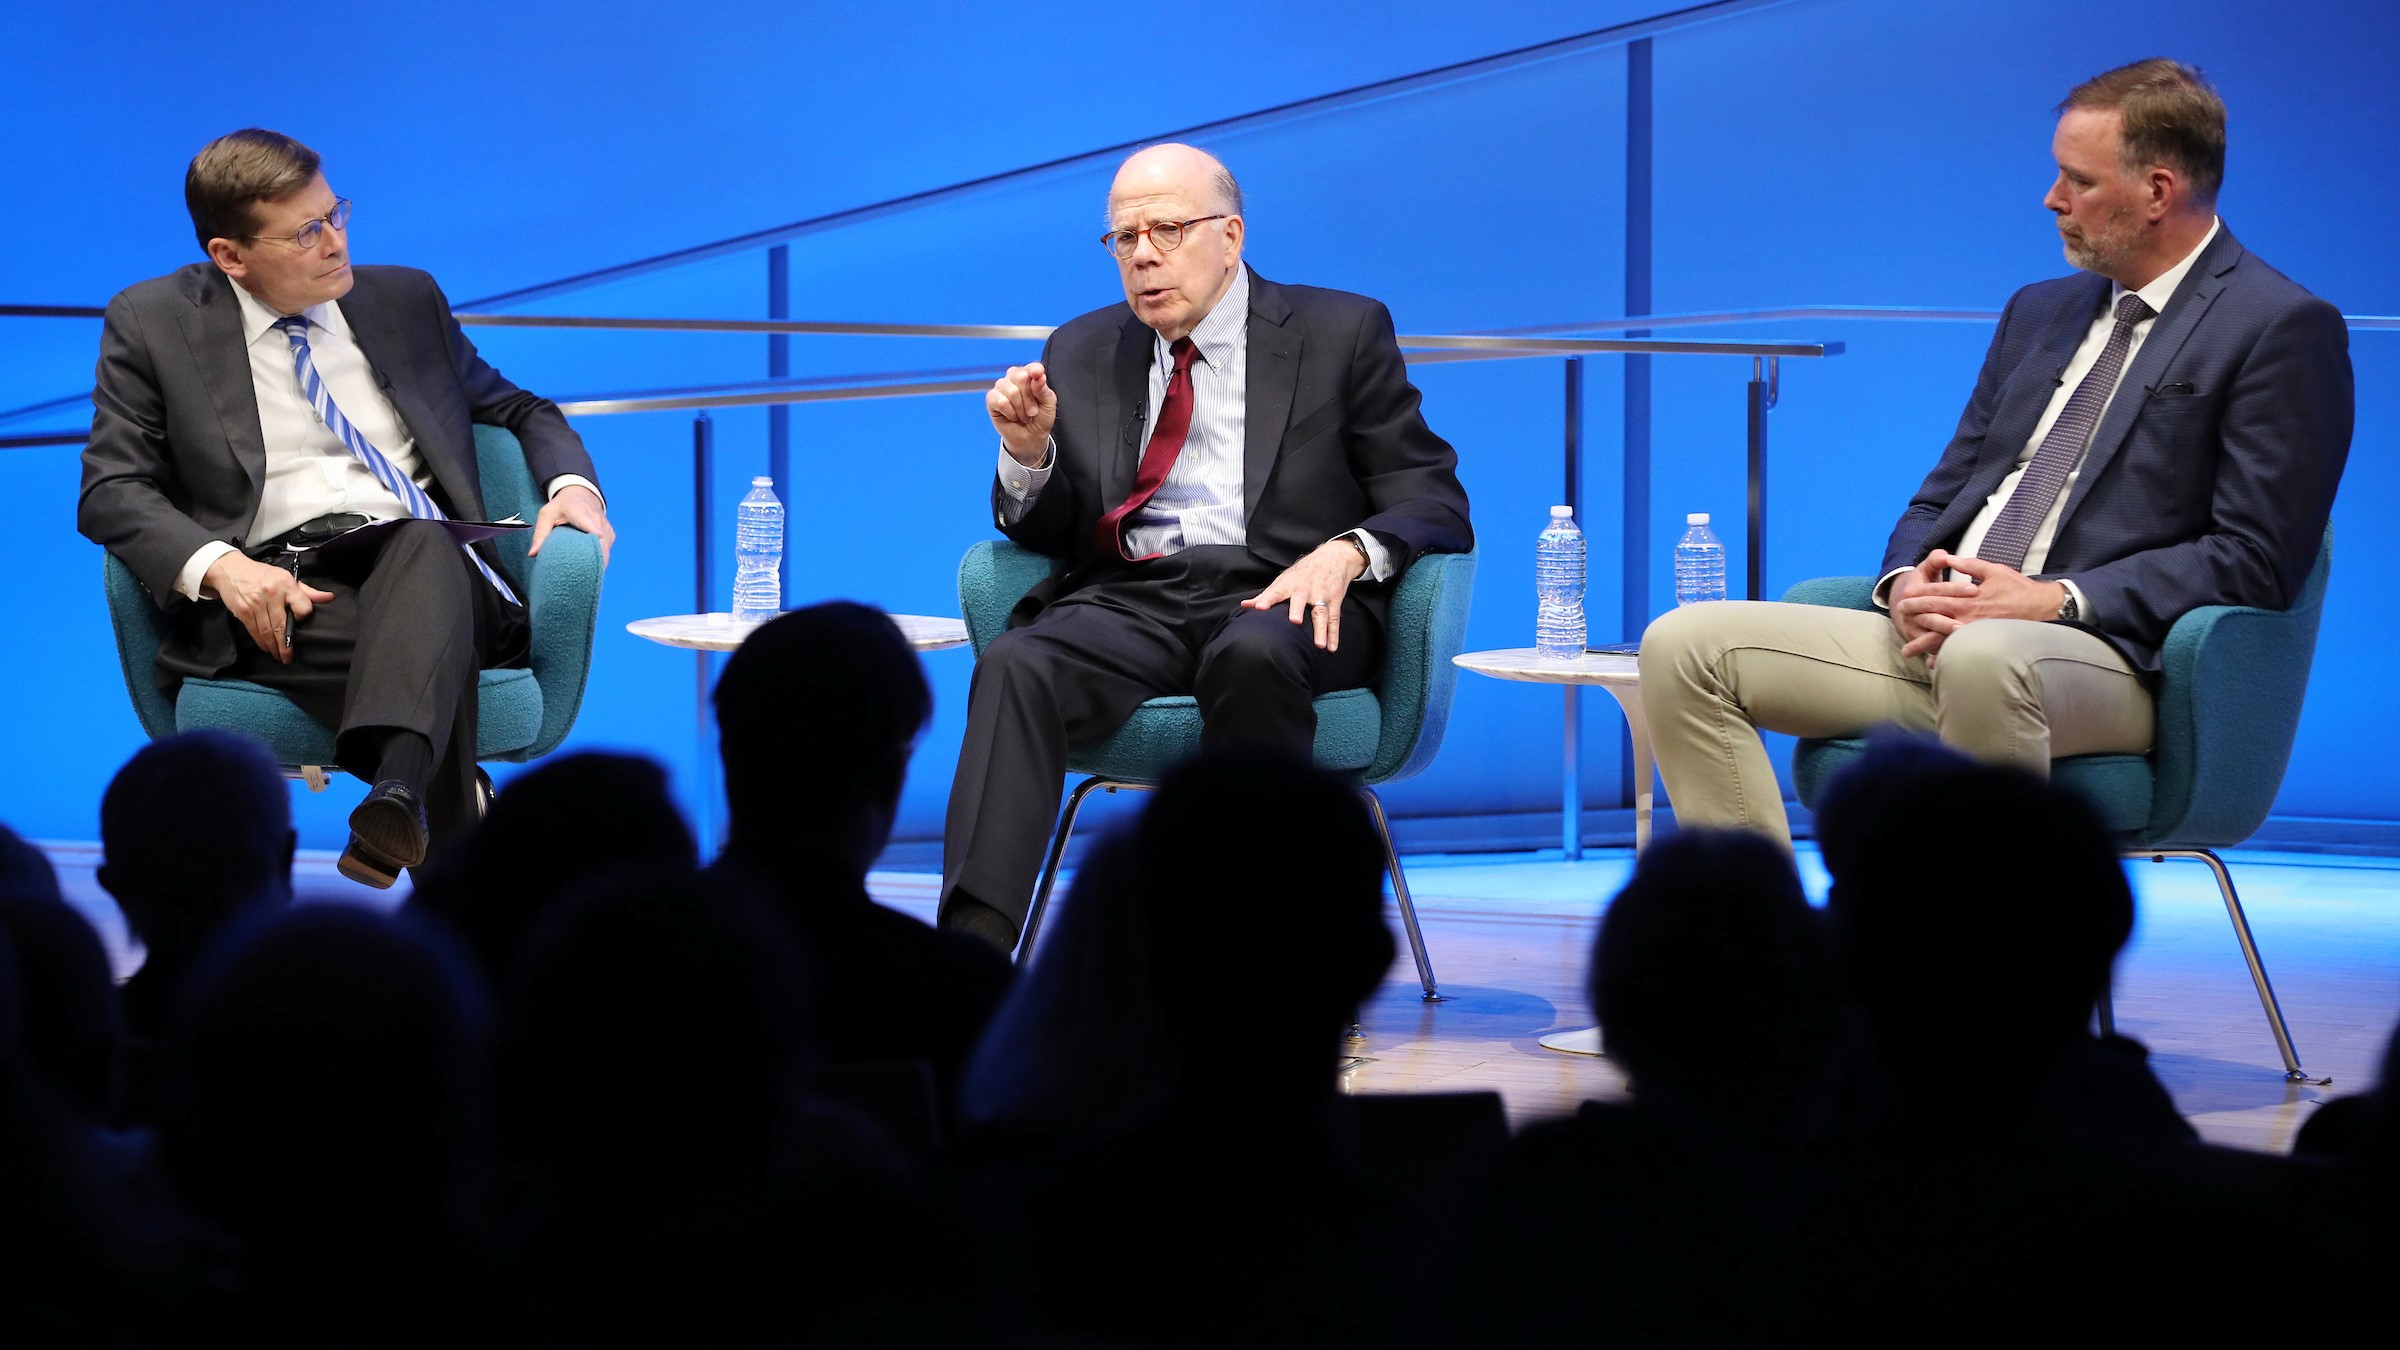 Former Acting CIA Directors John McLaughlin and Michael Morell and former CIA Senior Paramilitary Officer Phil Reilly take part in the public program, CIA: Essential Intelligence: The CIA’s Response to 9/11, in the Museum's auditorium.